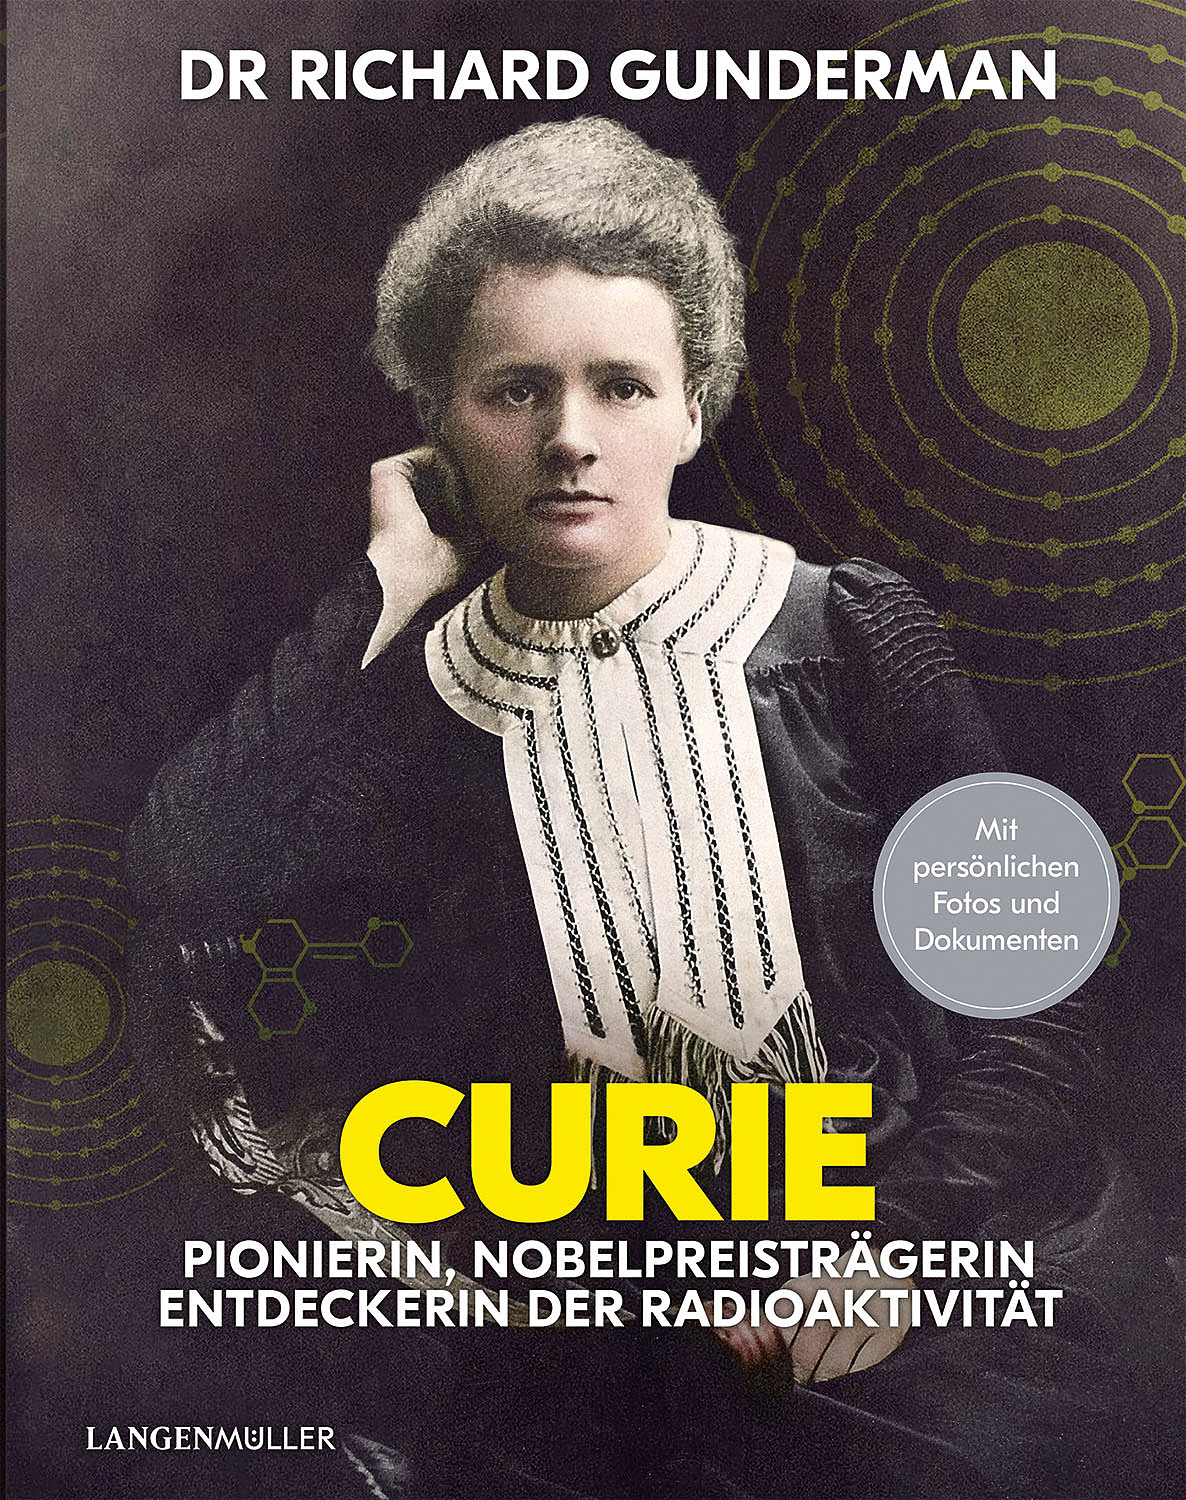 Book review on “Currie” – the spectrum of science